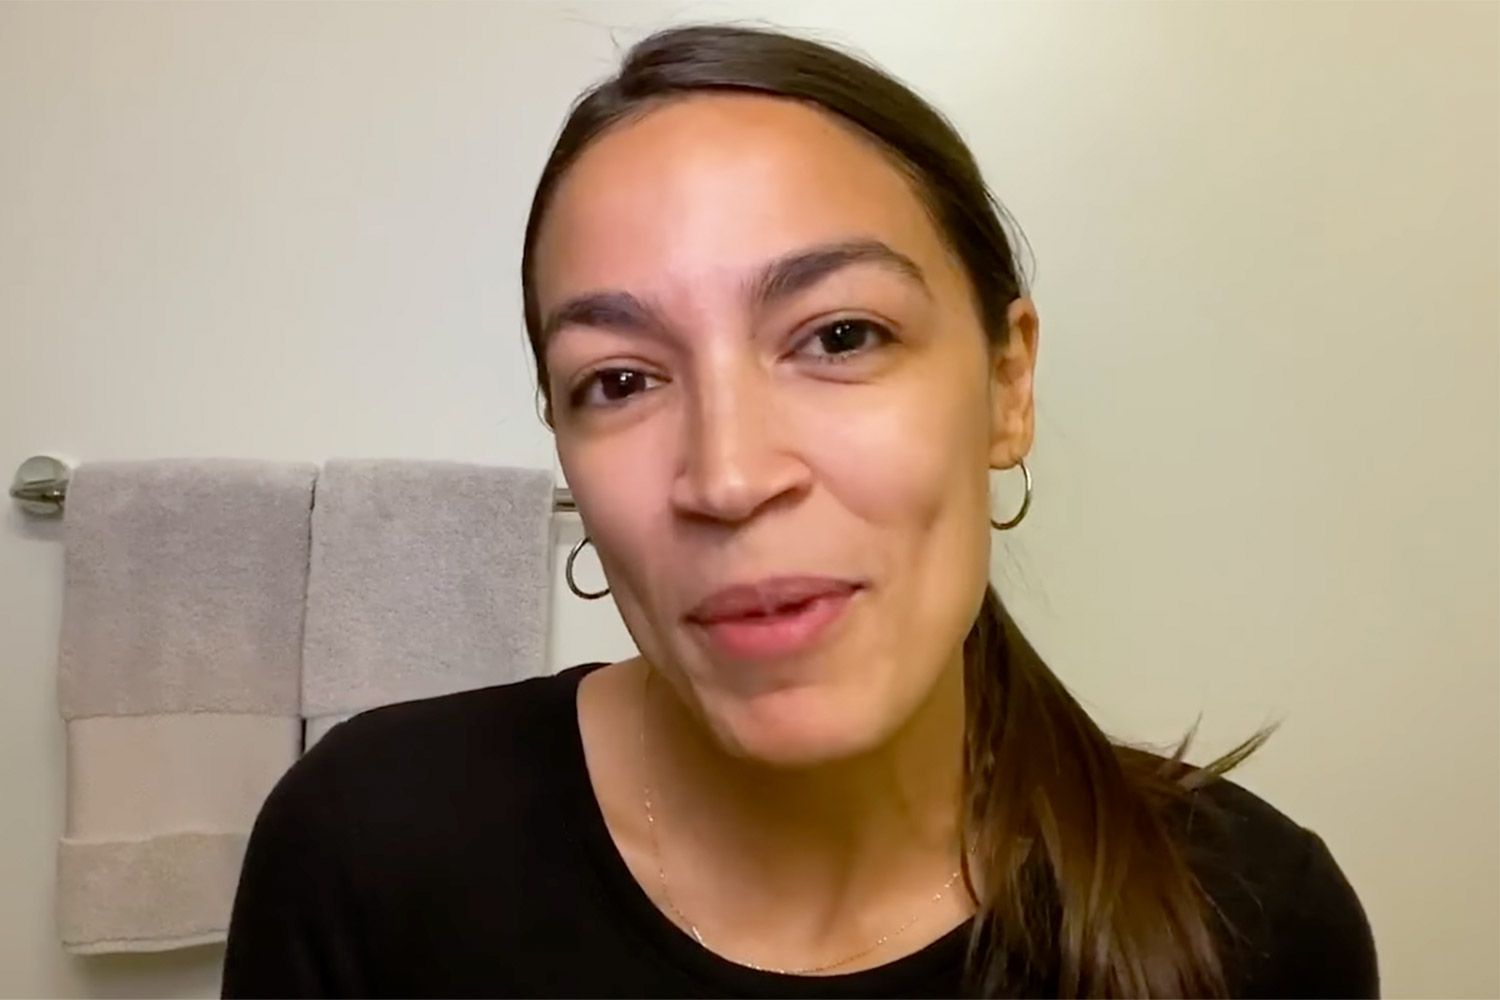 Alexandria Ocasio-Cortez blessed the internet by sharing 